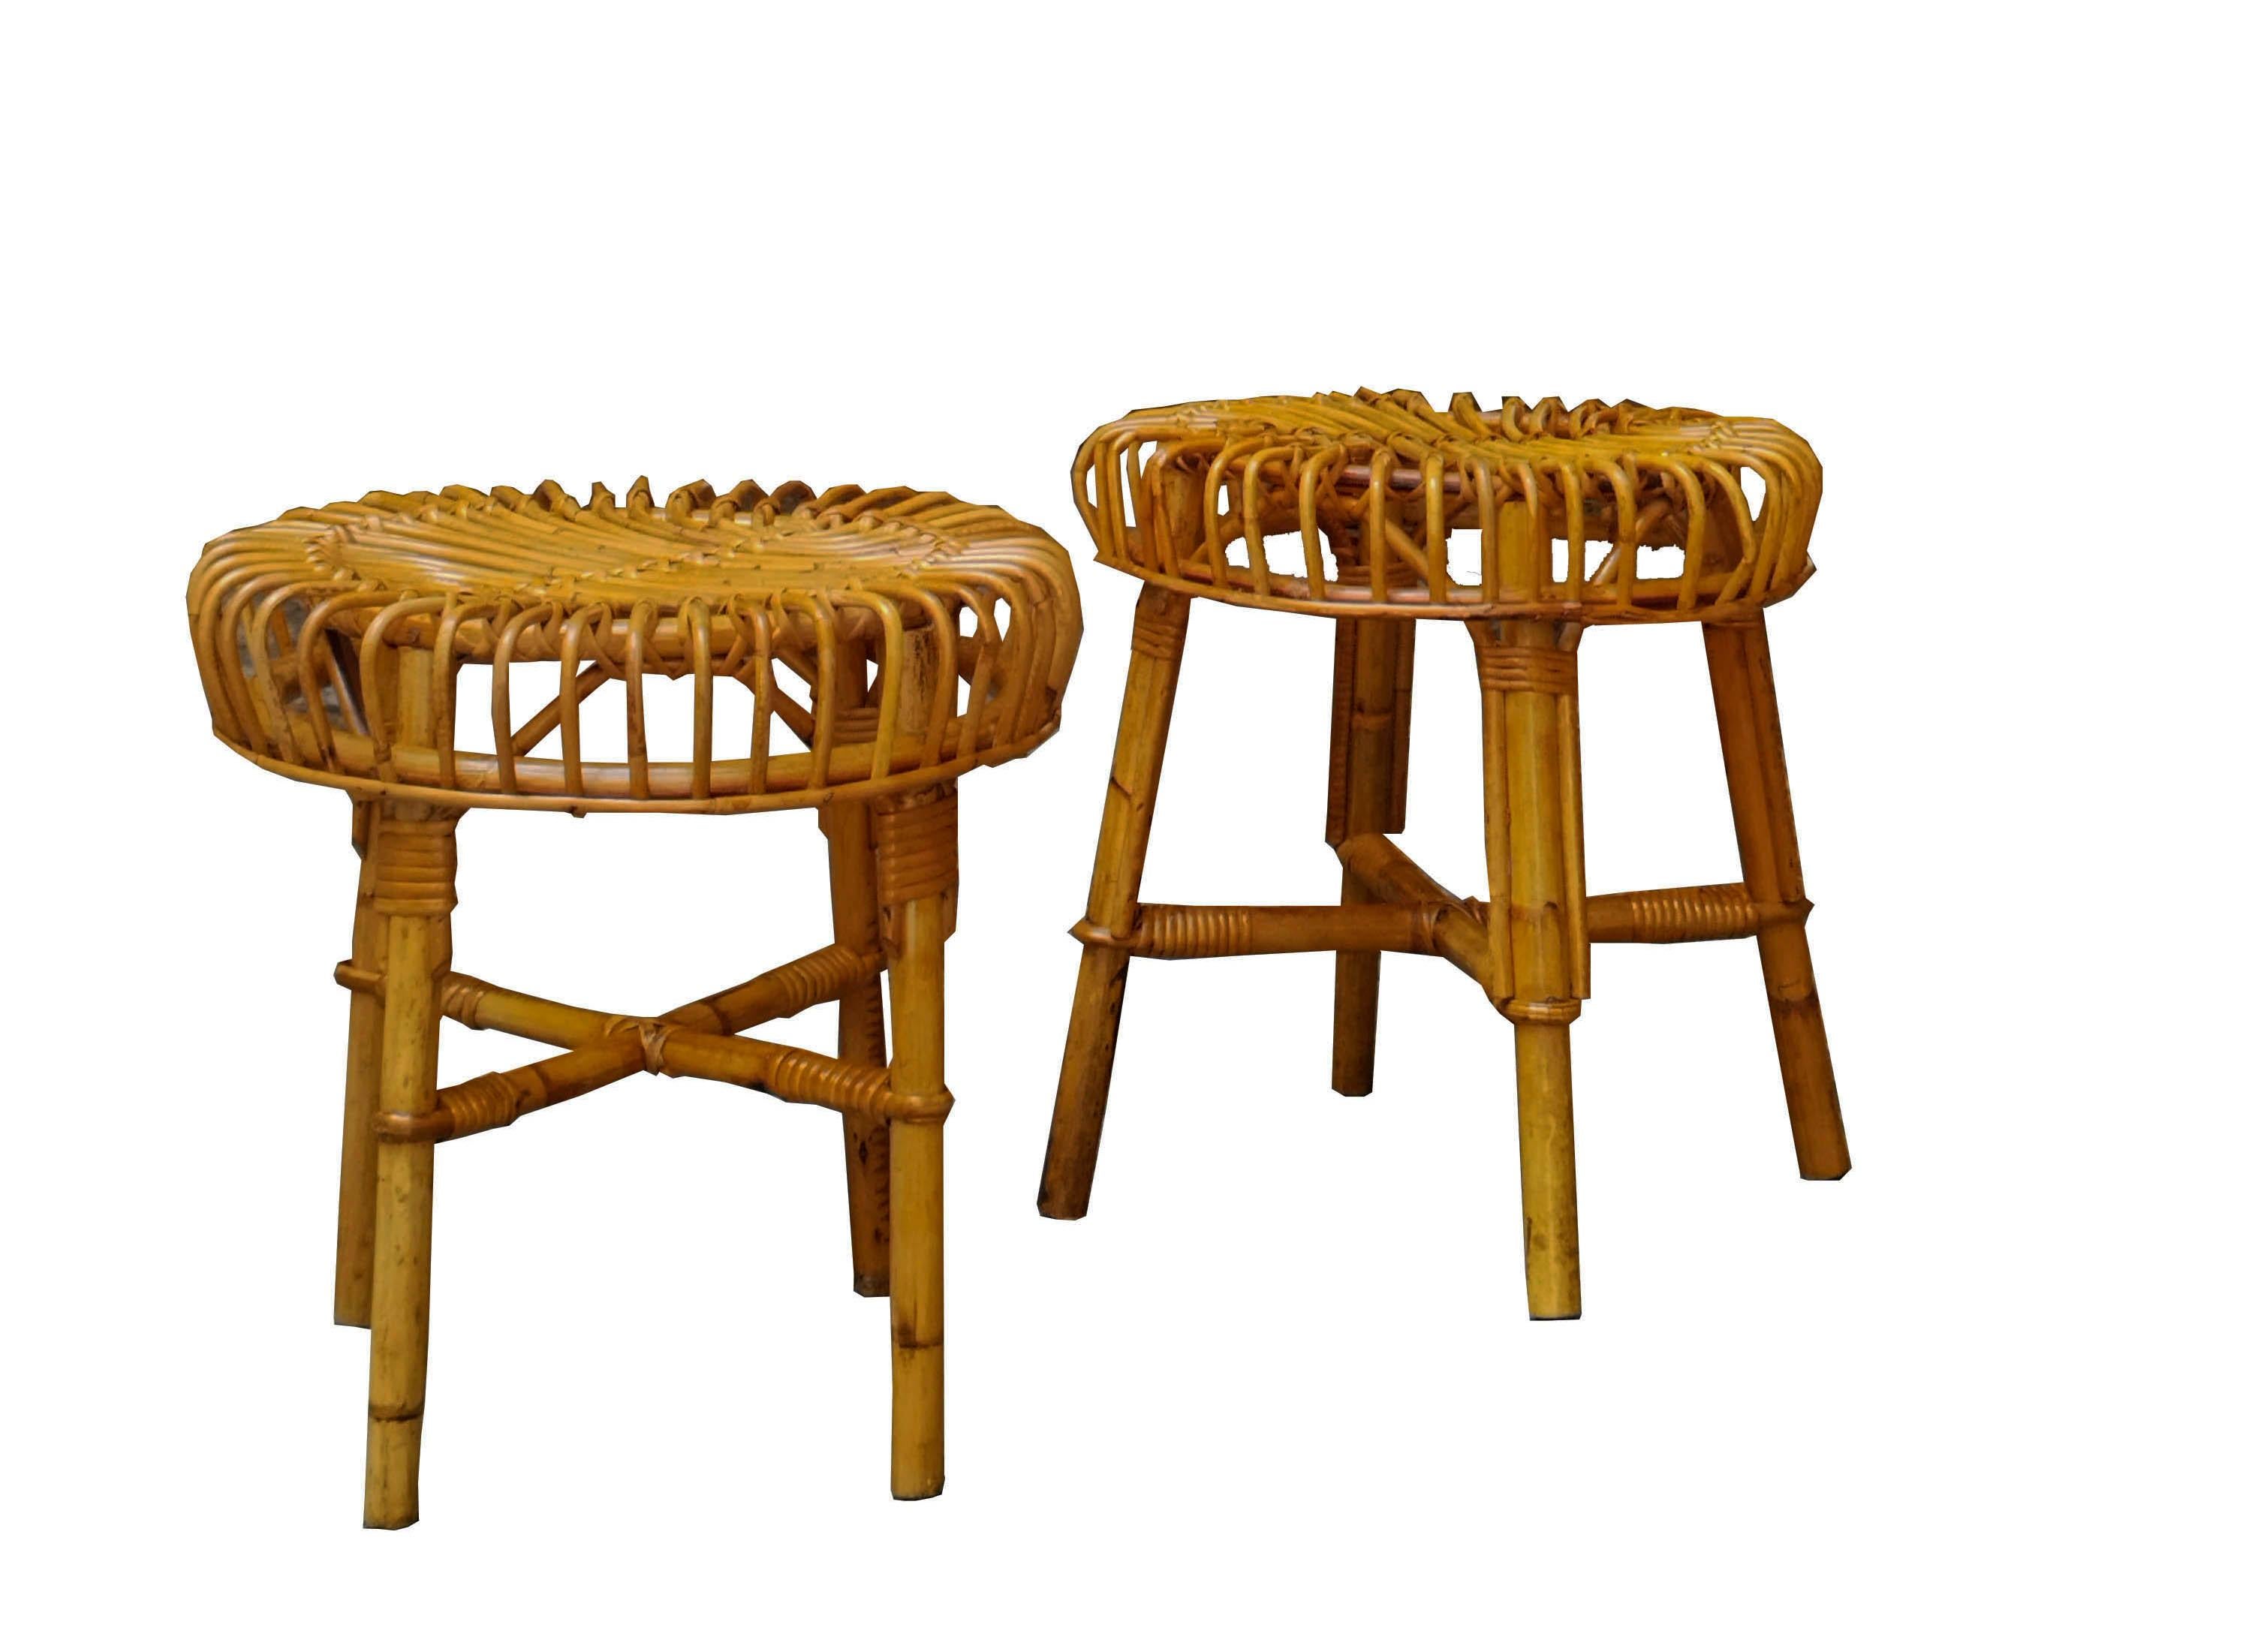 Pair of round rattan and bamboo stools designed by Franco Albini and produced by Bonacina in the 1960s.